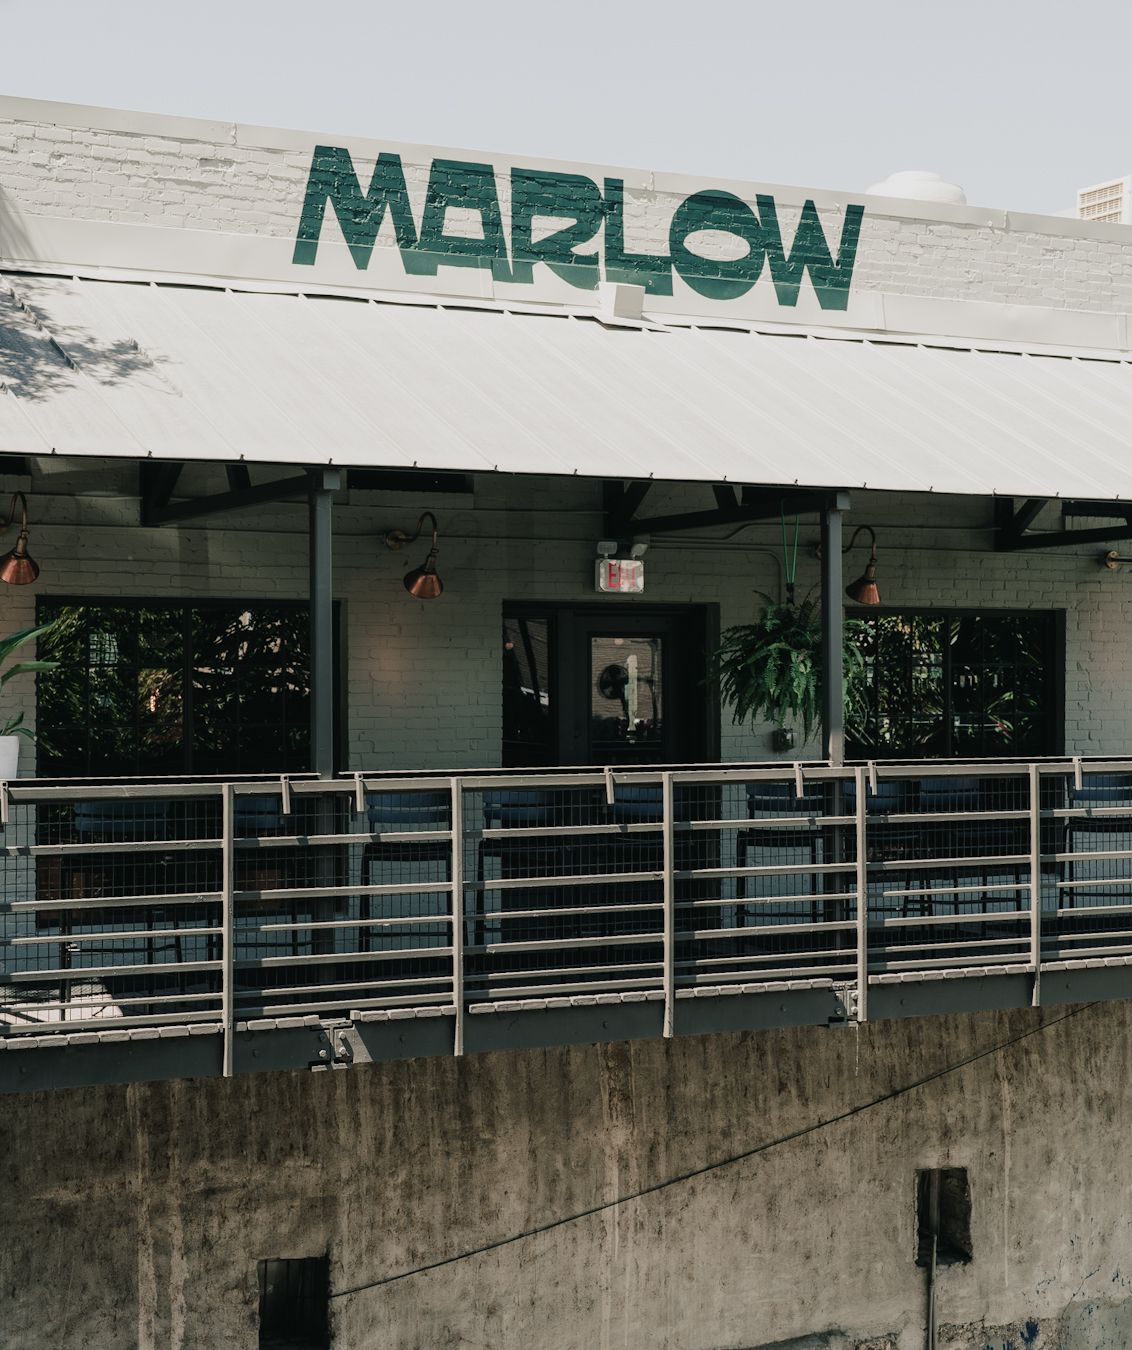 The outdoor space of a bar with the words MARLOW on the awning.